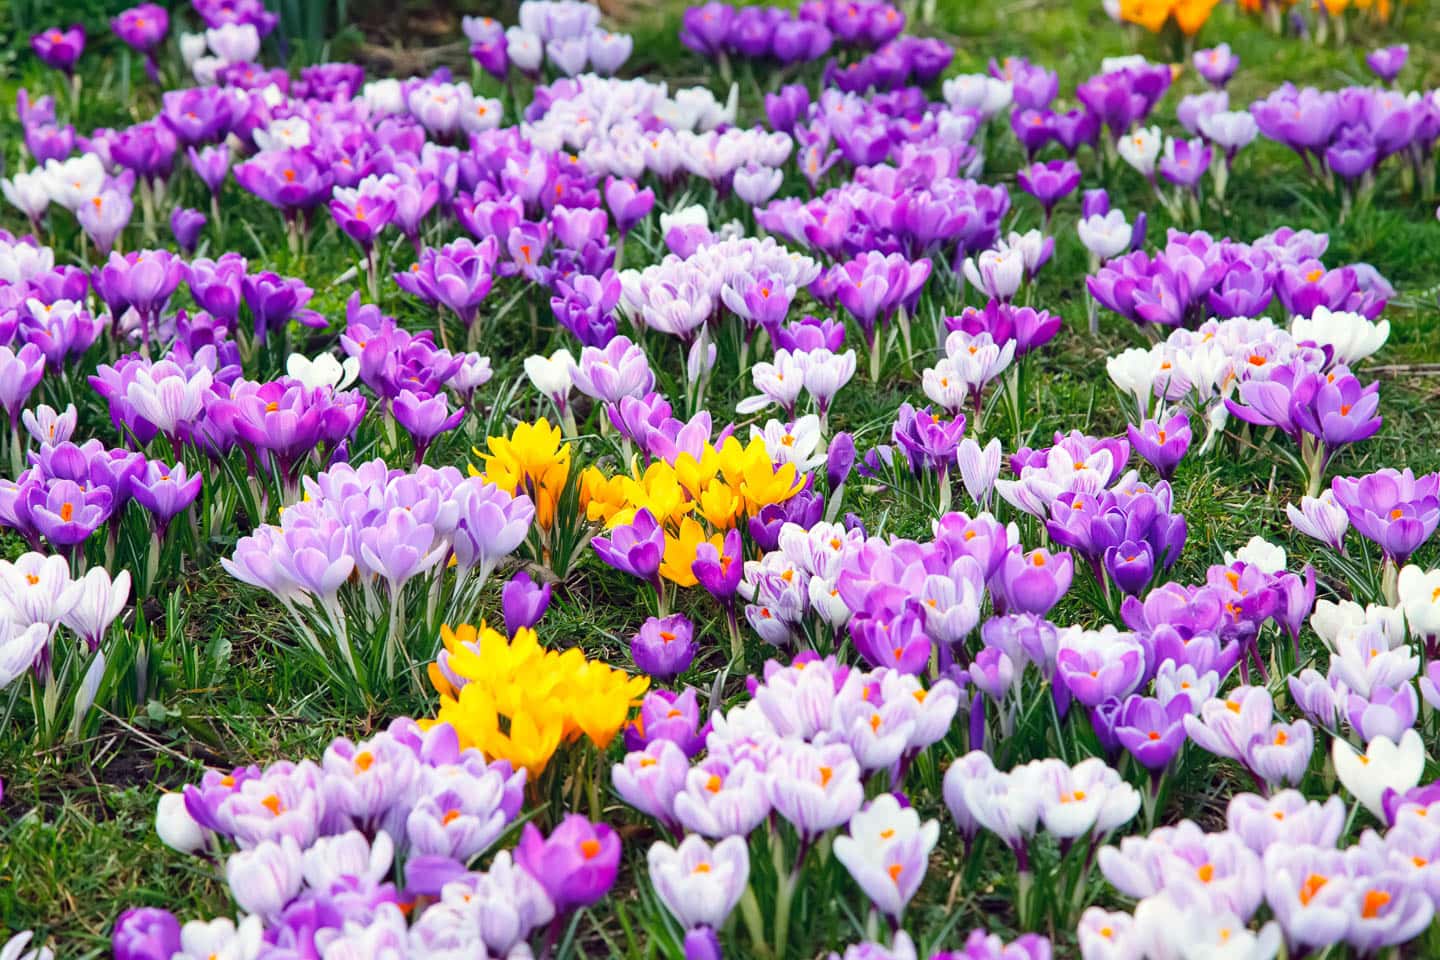 A mass of purple, white and yellow crocus flowers in early spring